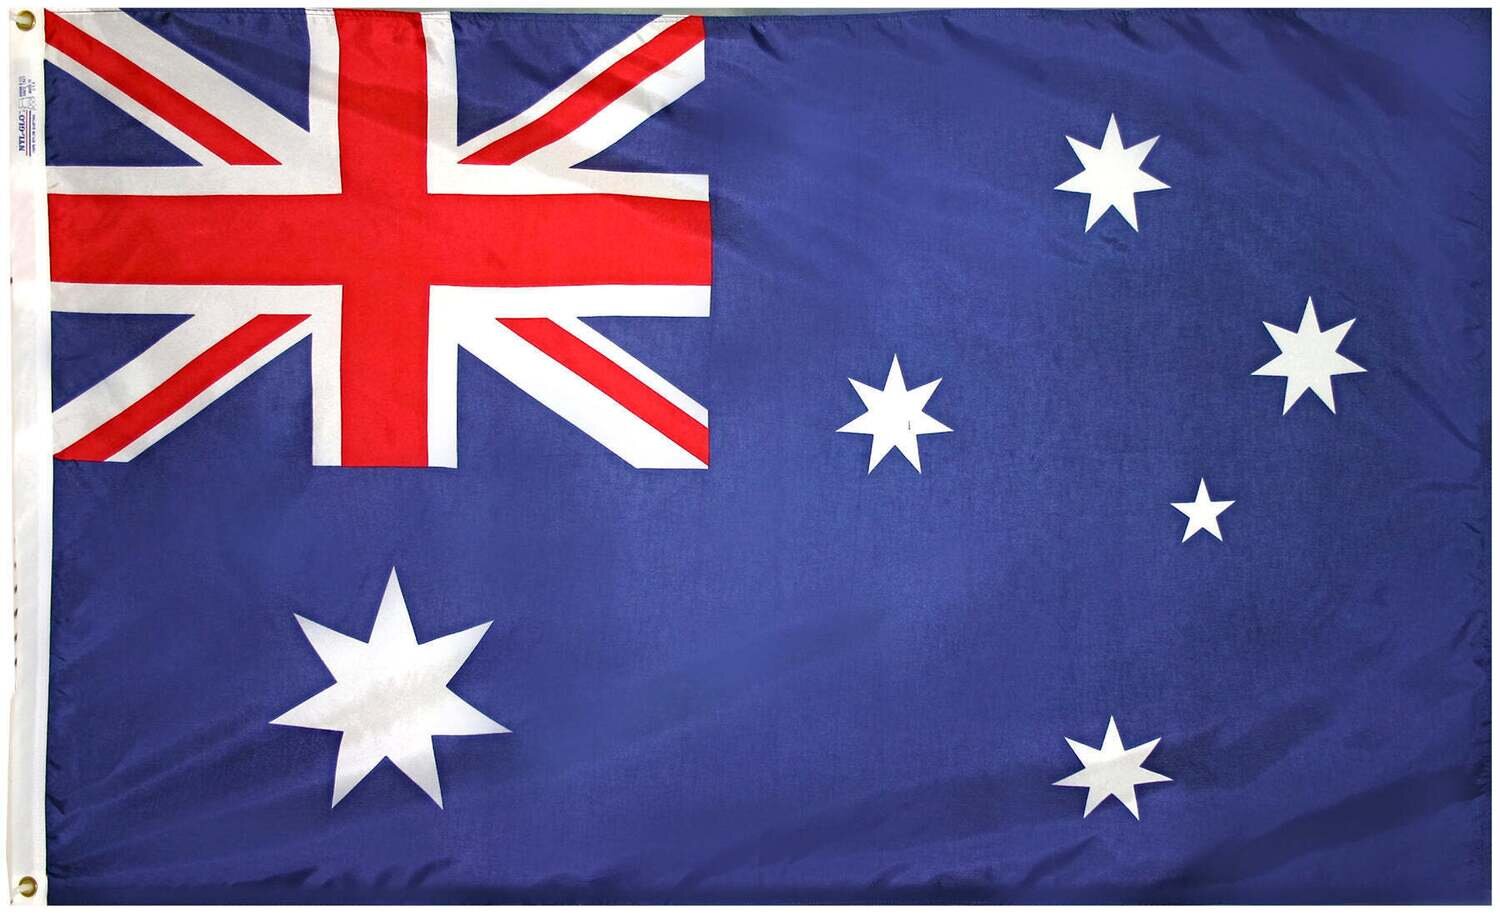 Australia Flag 2x3 ft. Nylon SolarGuard Nyl-Glo 100% Made in USA to Official United Nations Design Specifications.